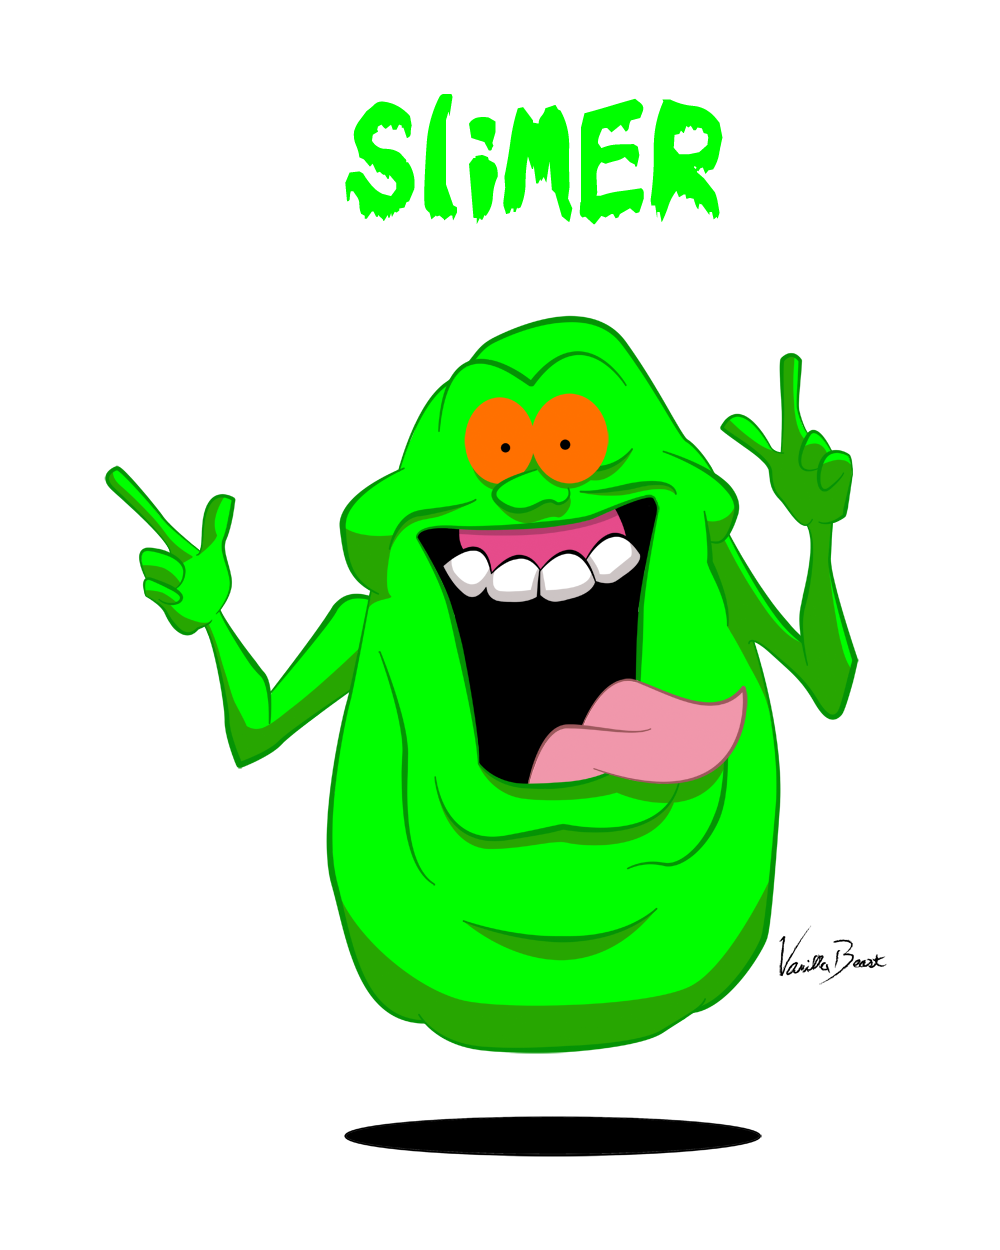 13. Found. clipart images for 'Slimer'. 